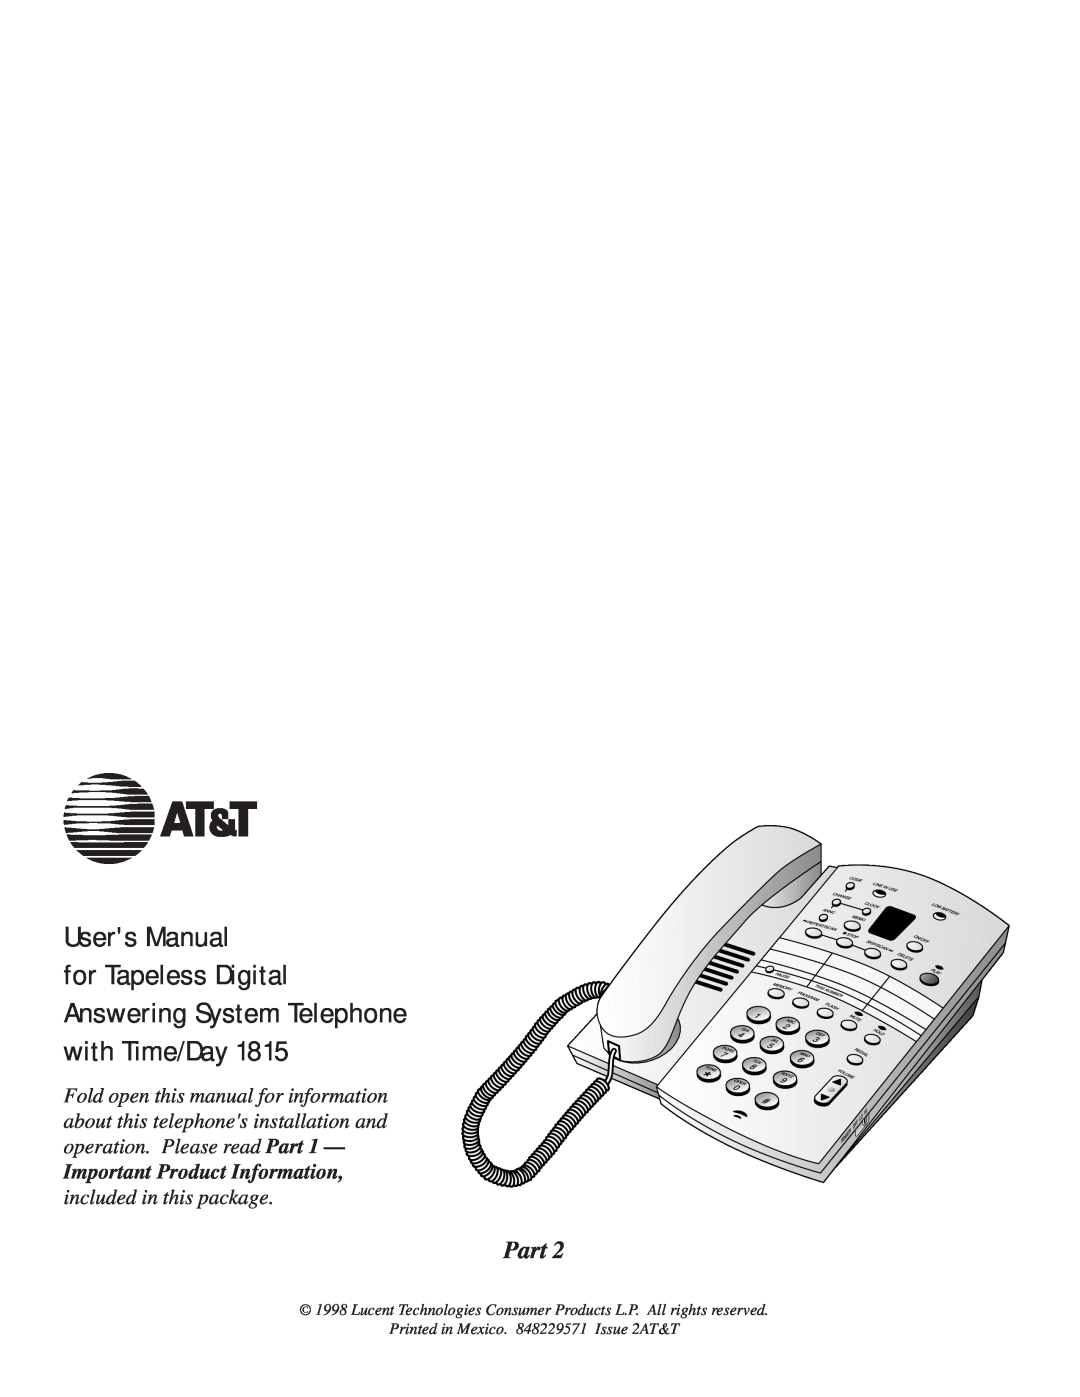 AT&T 1815 user manual for Tapeless Digital Answering System Telephone with Time/Day, Part, Important Product Information 